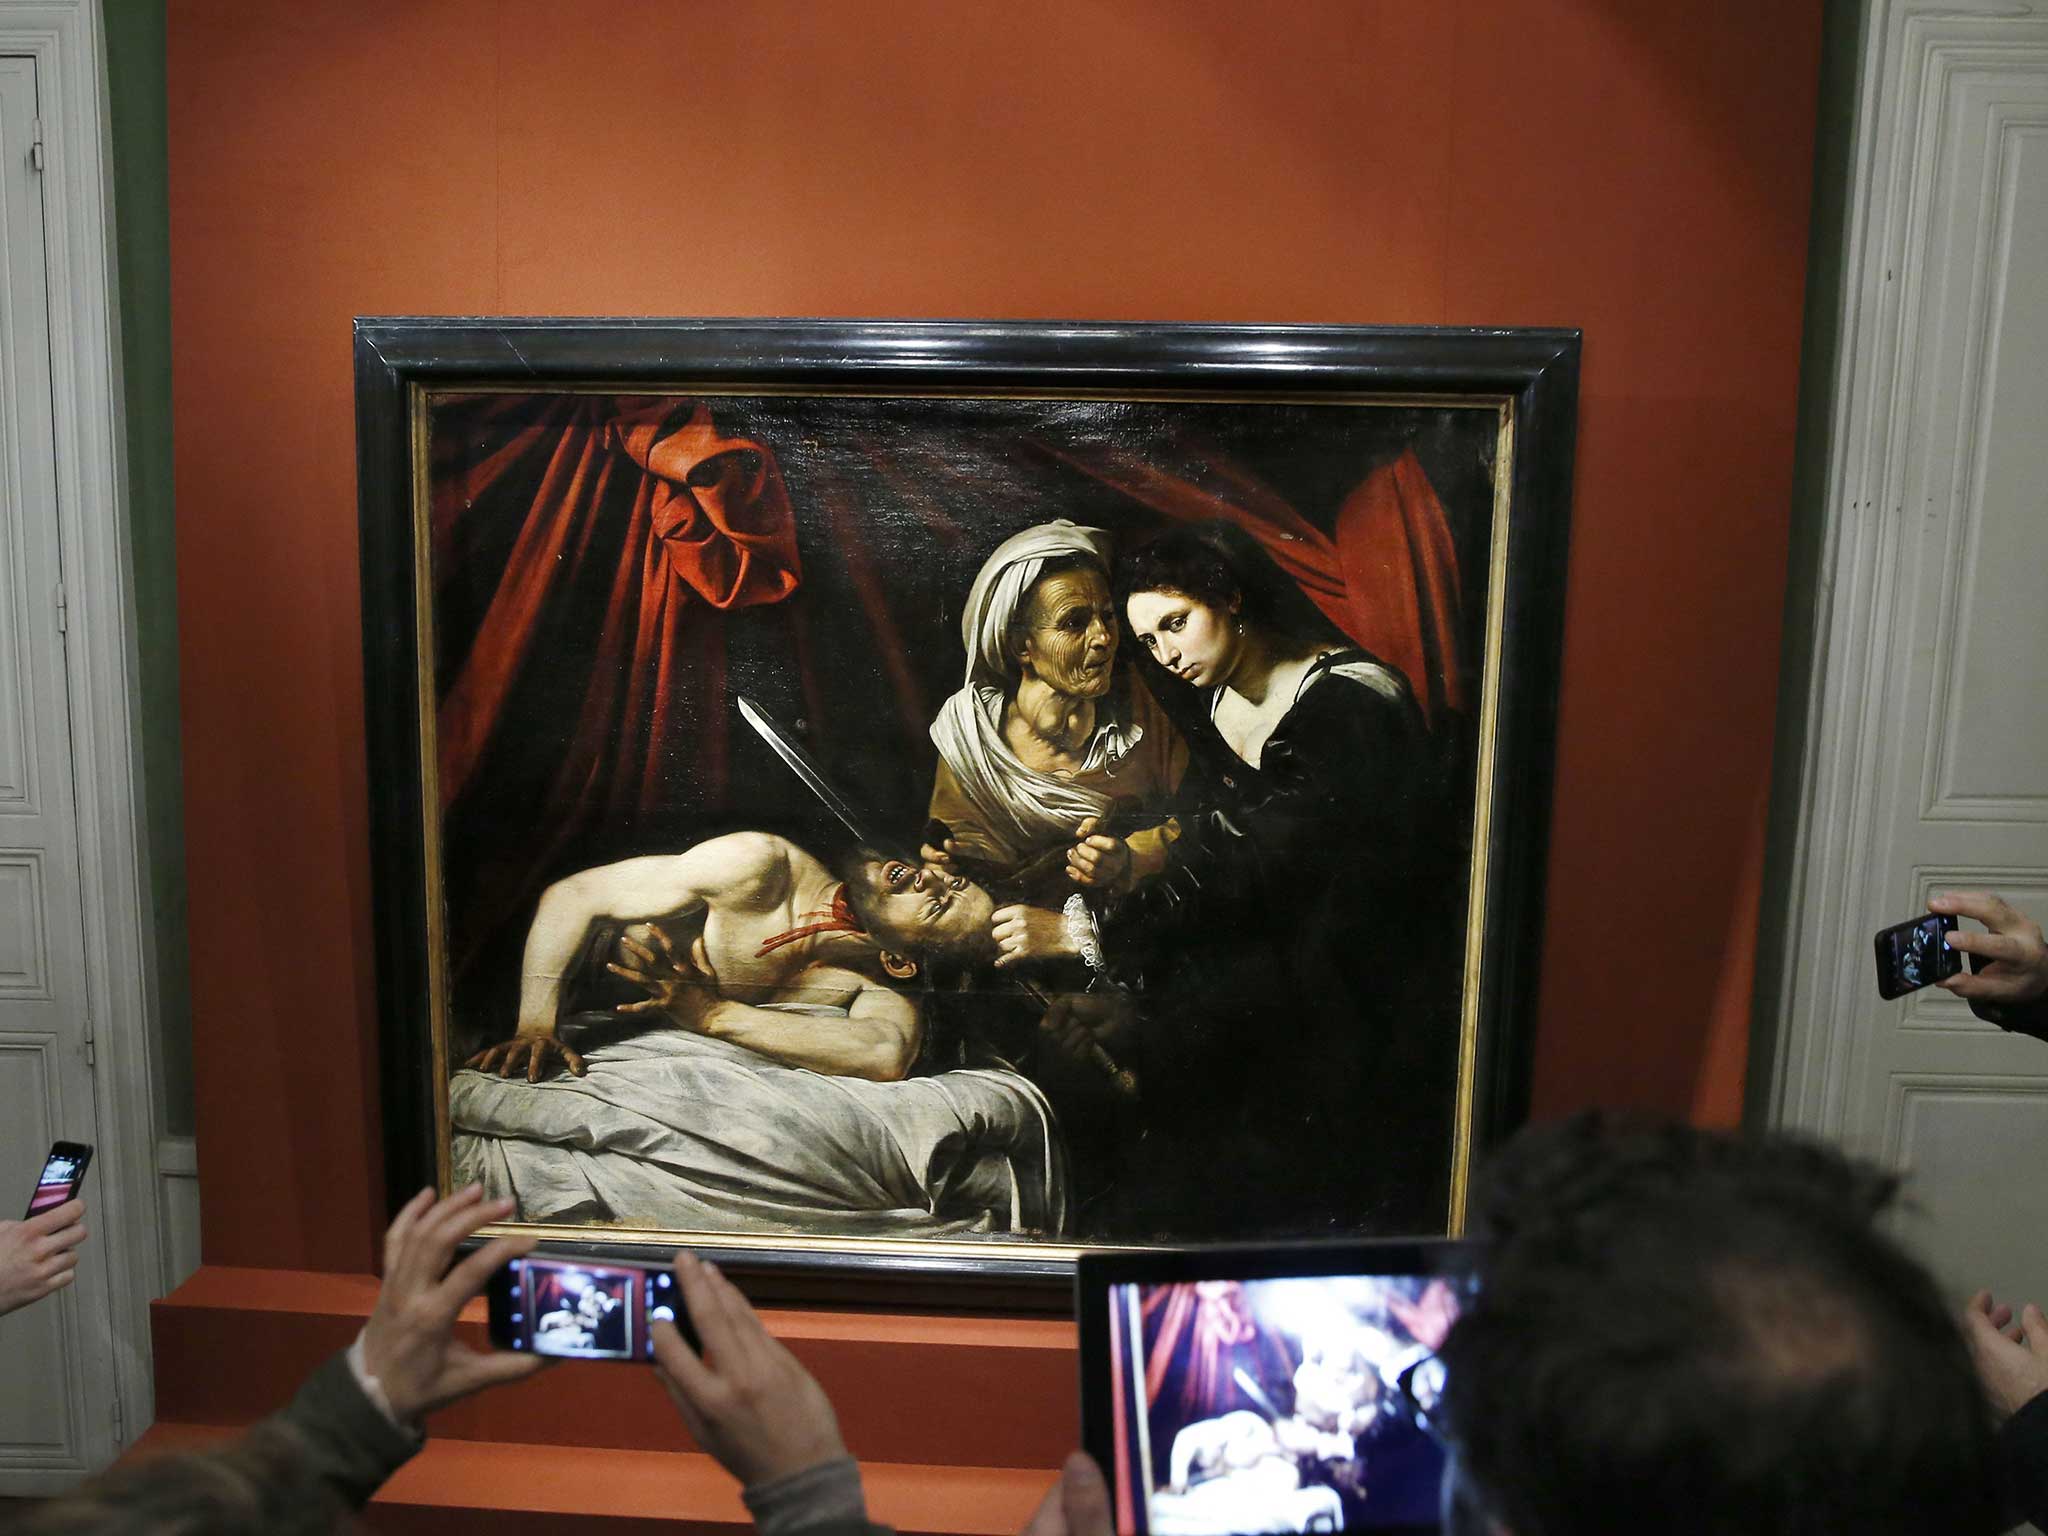 Experts are divided on whether the painting, 'Judith Beheading Holofernes', was created by Caravaggio